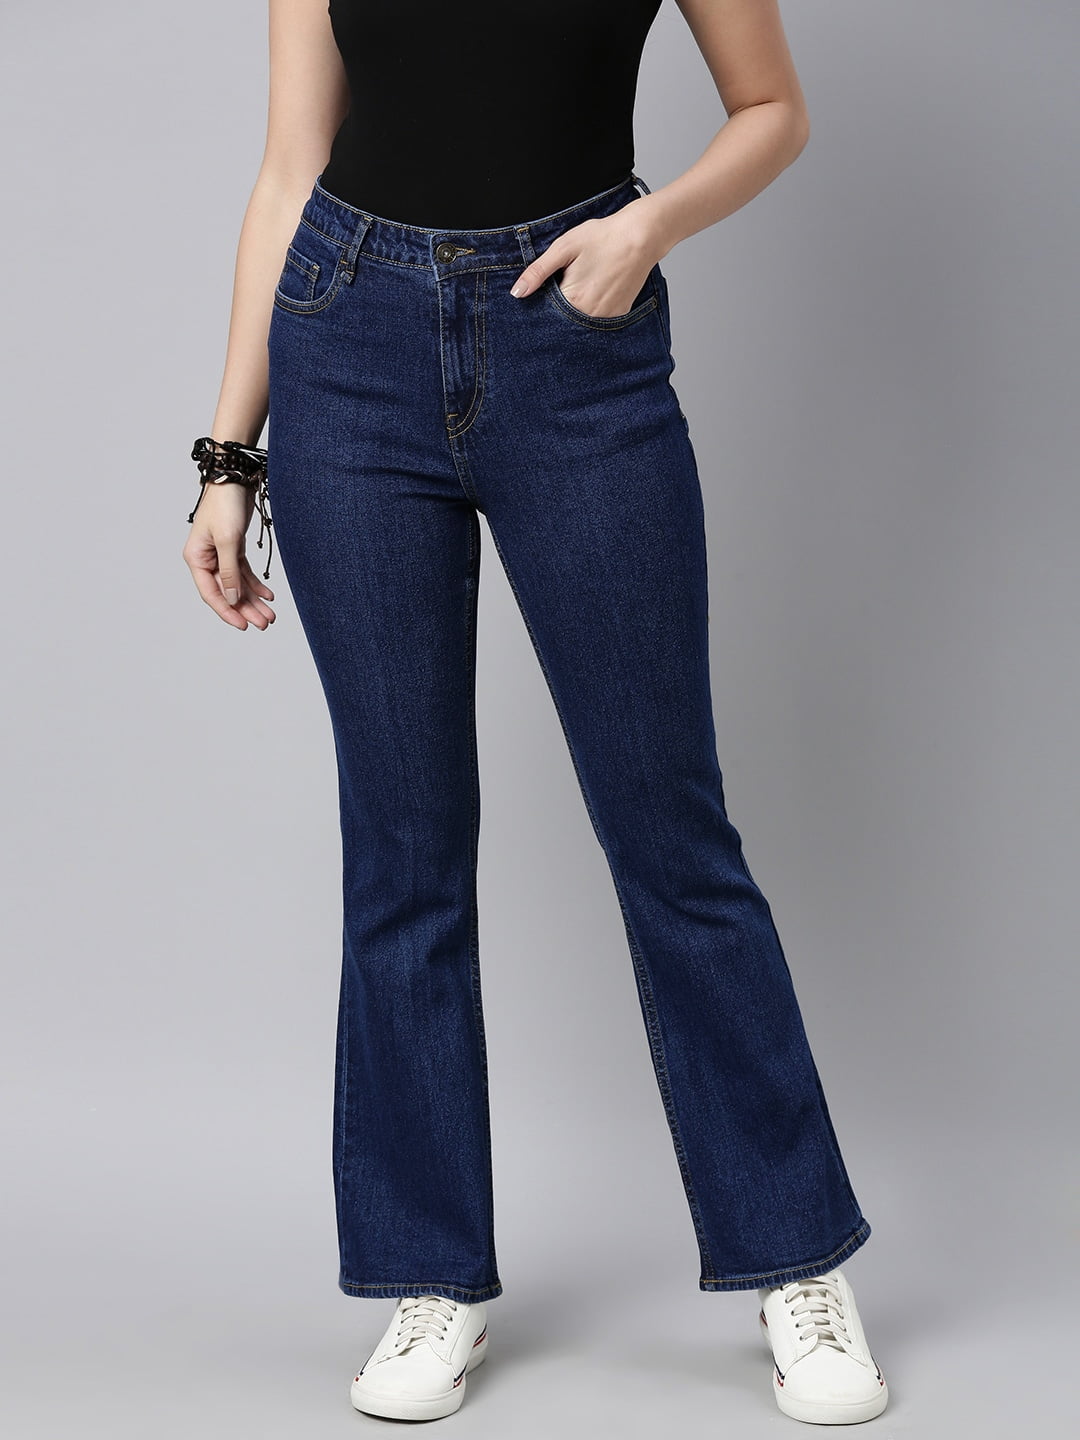 Myntra - Buy Lee Women's jeans at 80% off